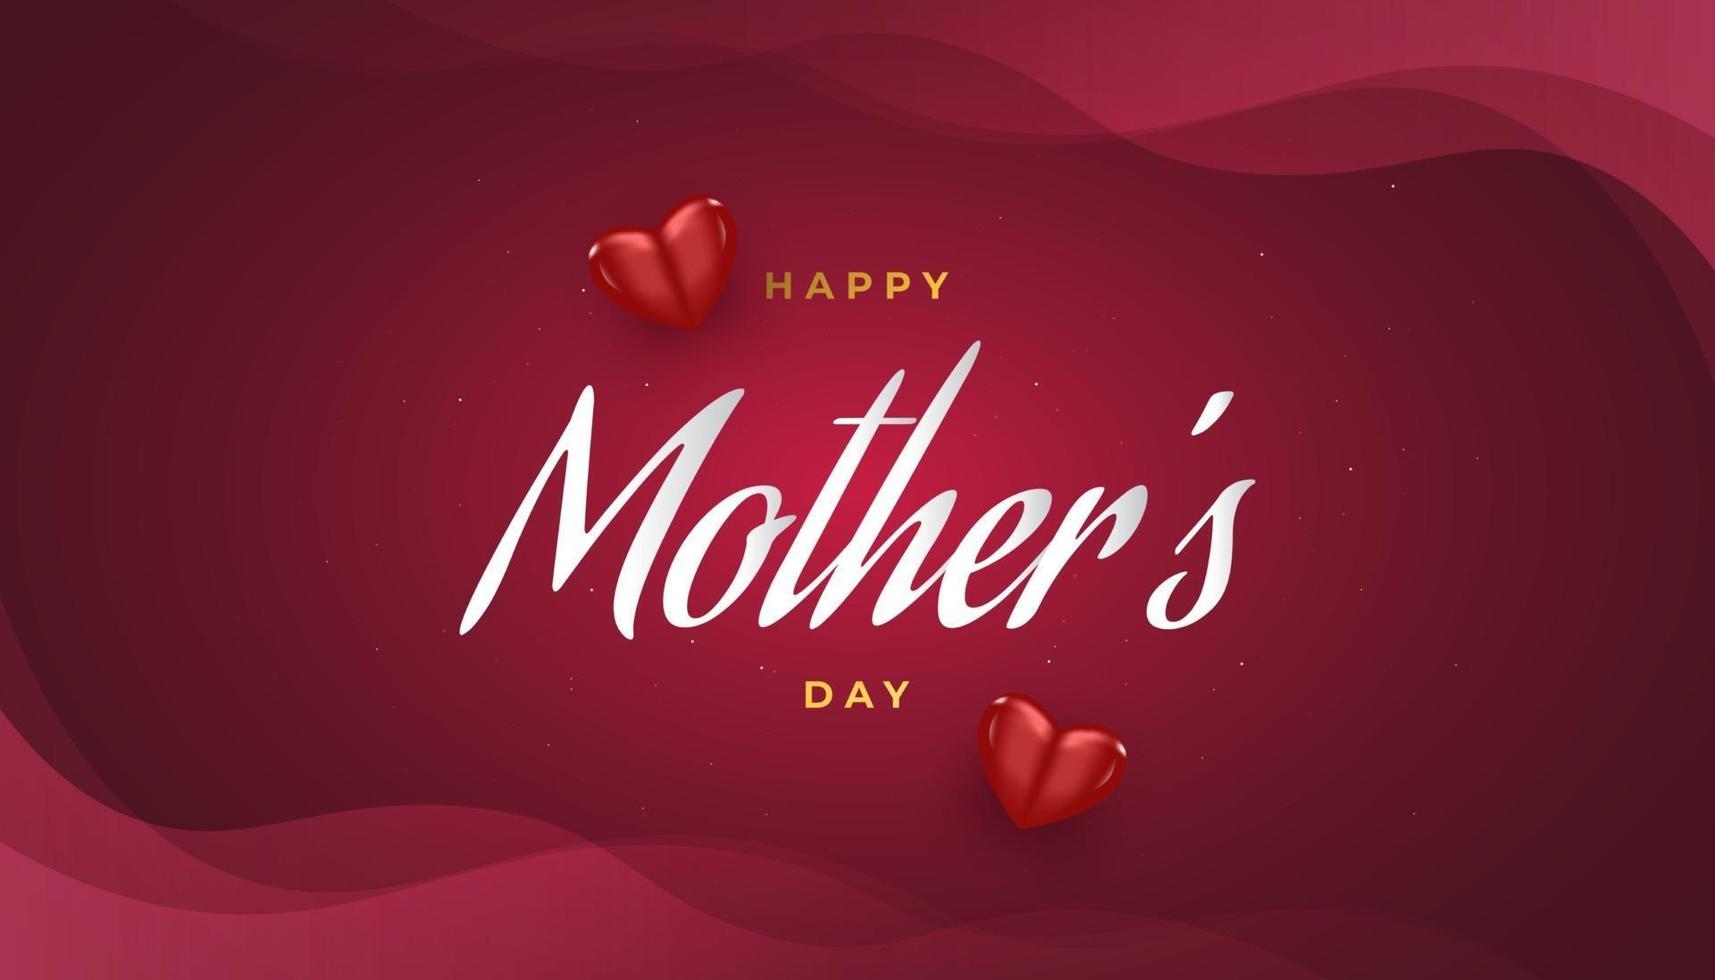 Mothers Day Greeting Card with Hearts Isolated on Red Background vector